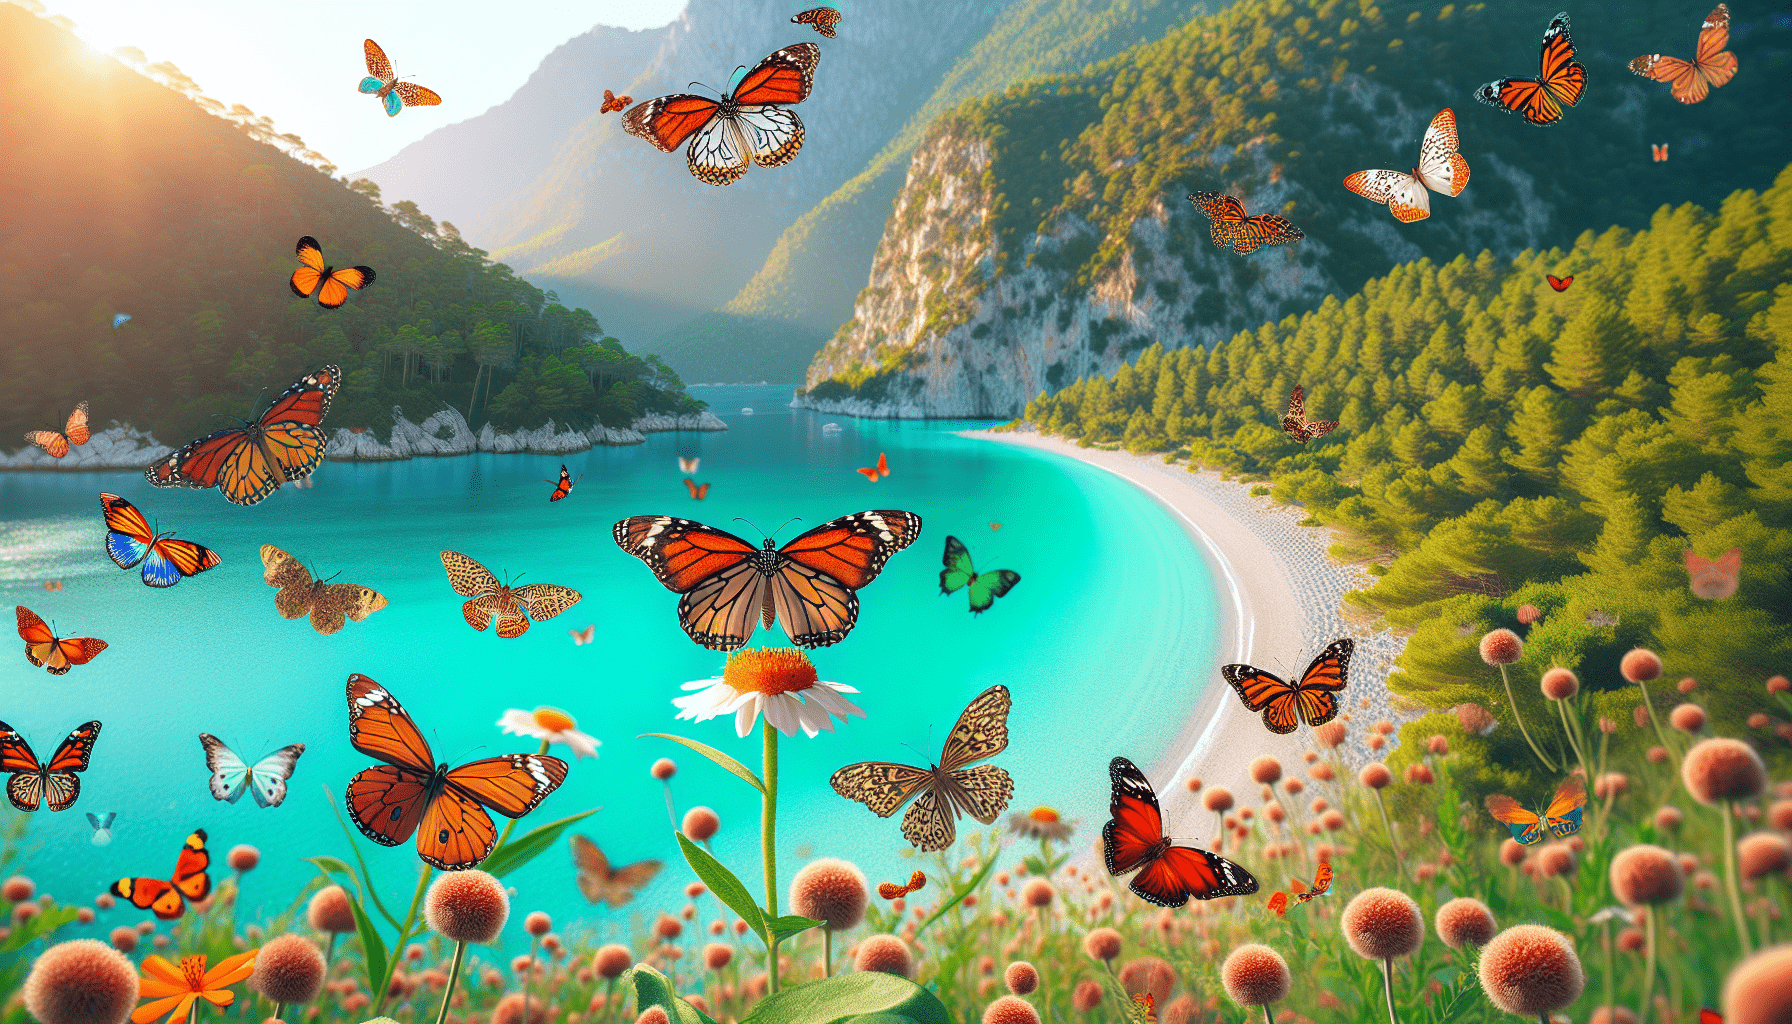 Vibrant butterflies flying over a turquoise river winding through a forested mountainous landscape at sunrise.